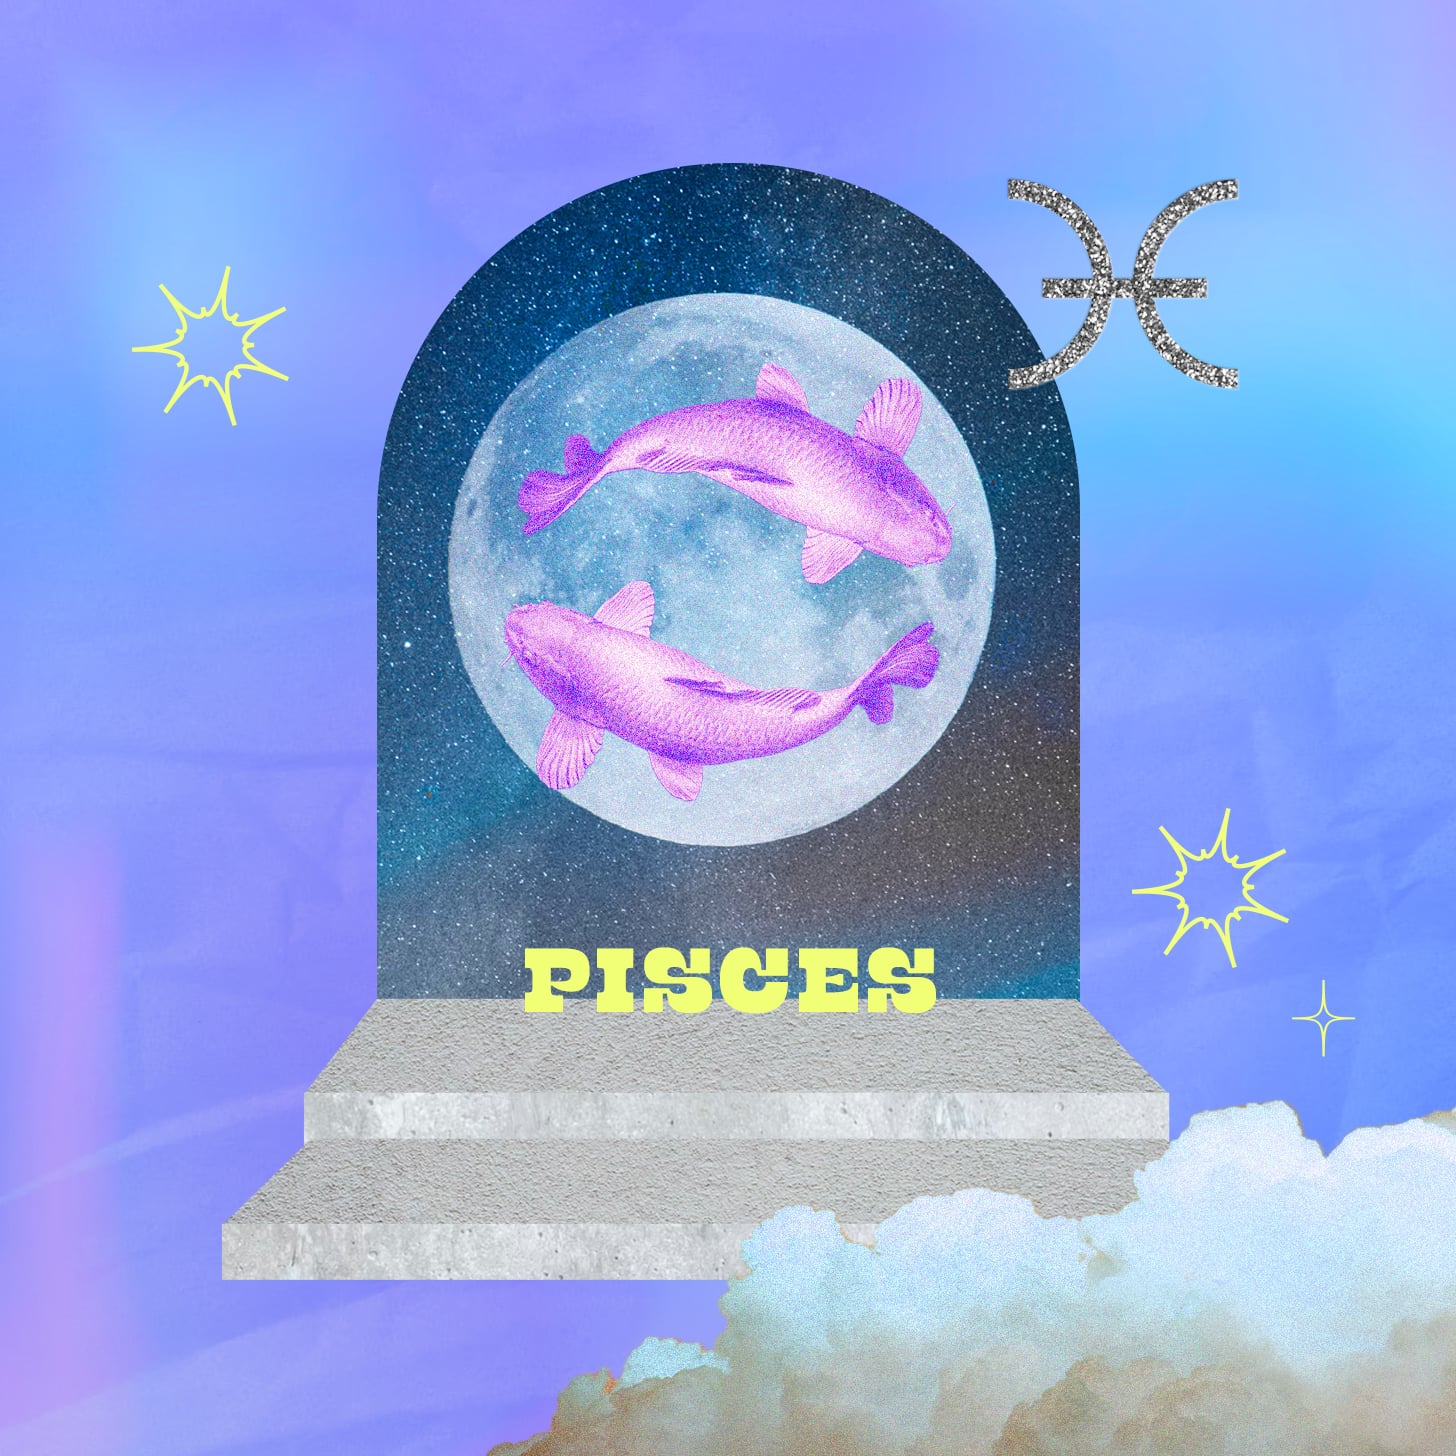 Pisces weekly horoscope for June 19, 2022